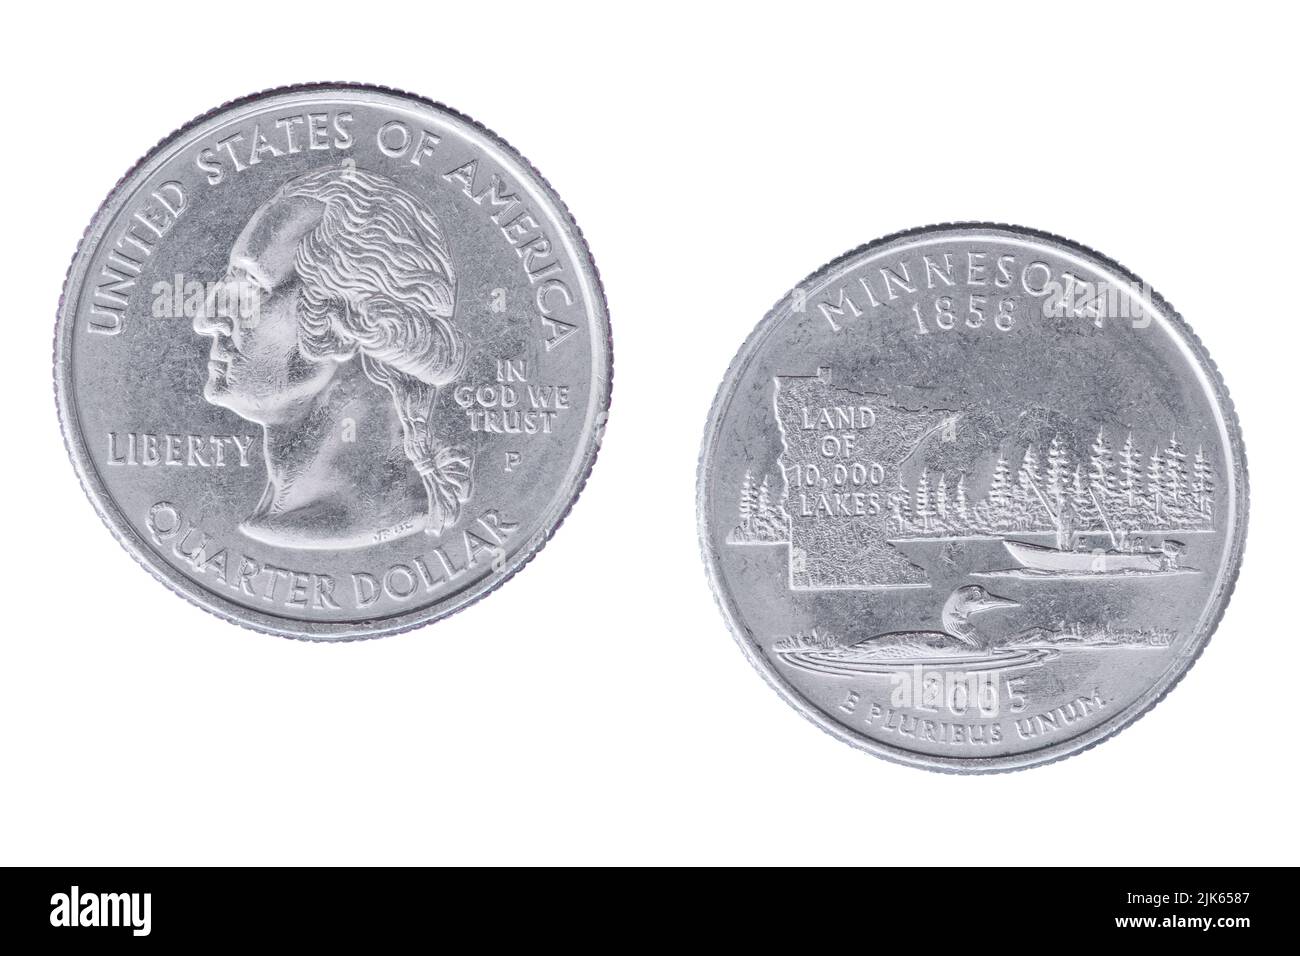 Obverse and reverse sides of the Minnesota 2005P State Commemorative Quarter isolated on a white background Stock Photo